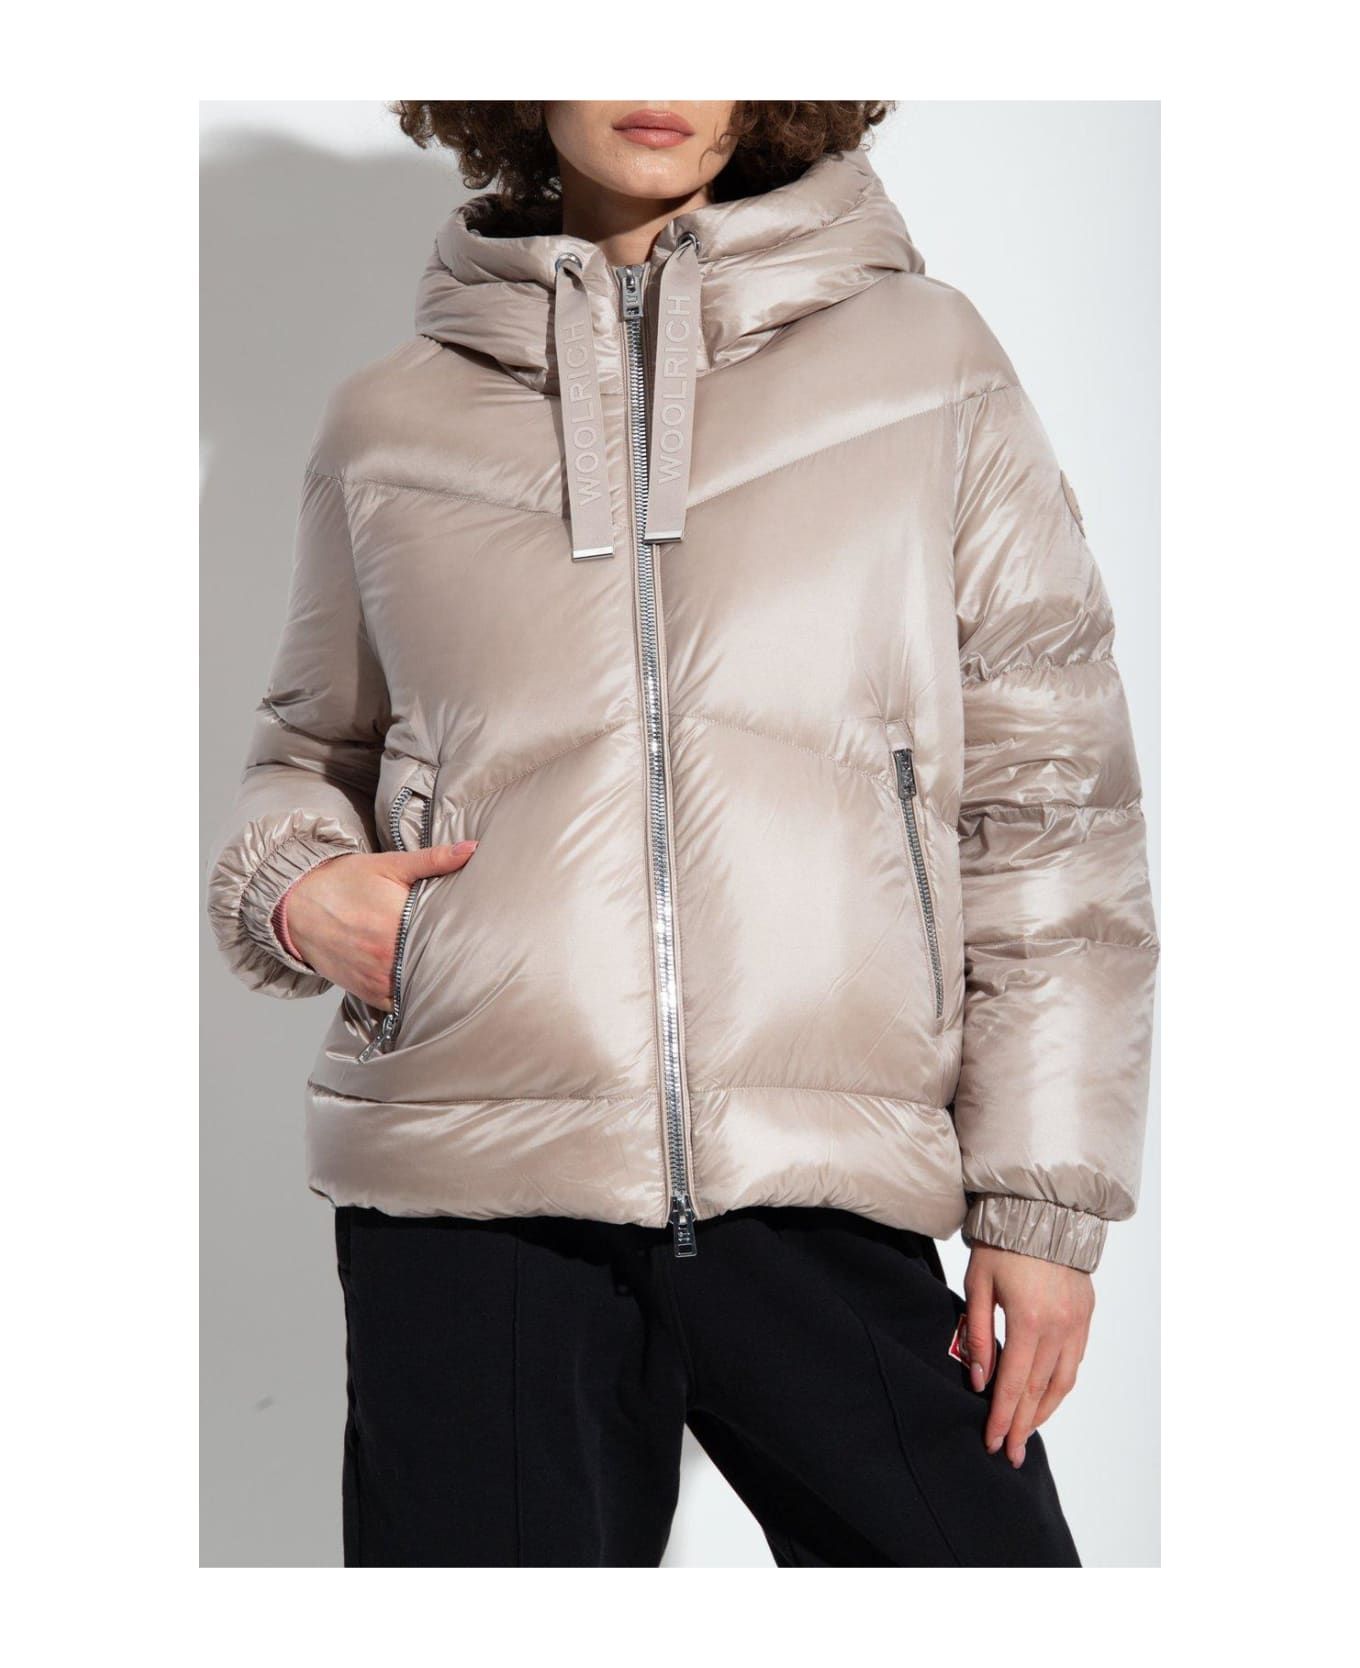 Woolrich Drawstring Hooded Puffer Jacket - LIGHT TAUPE